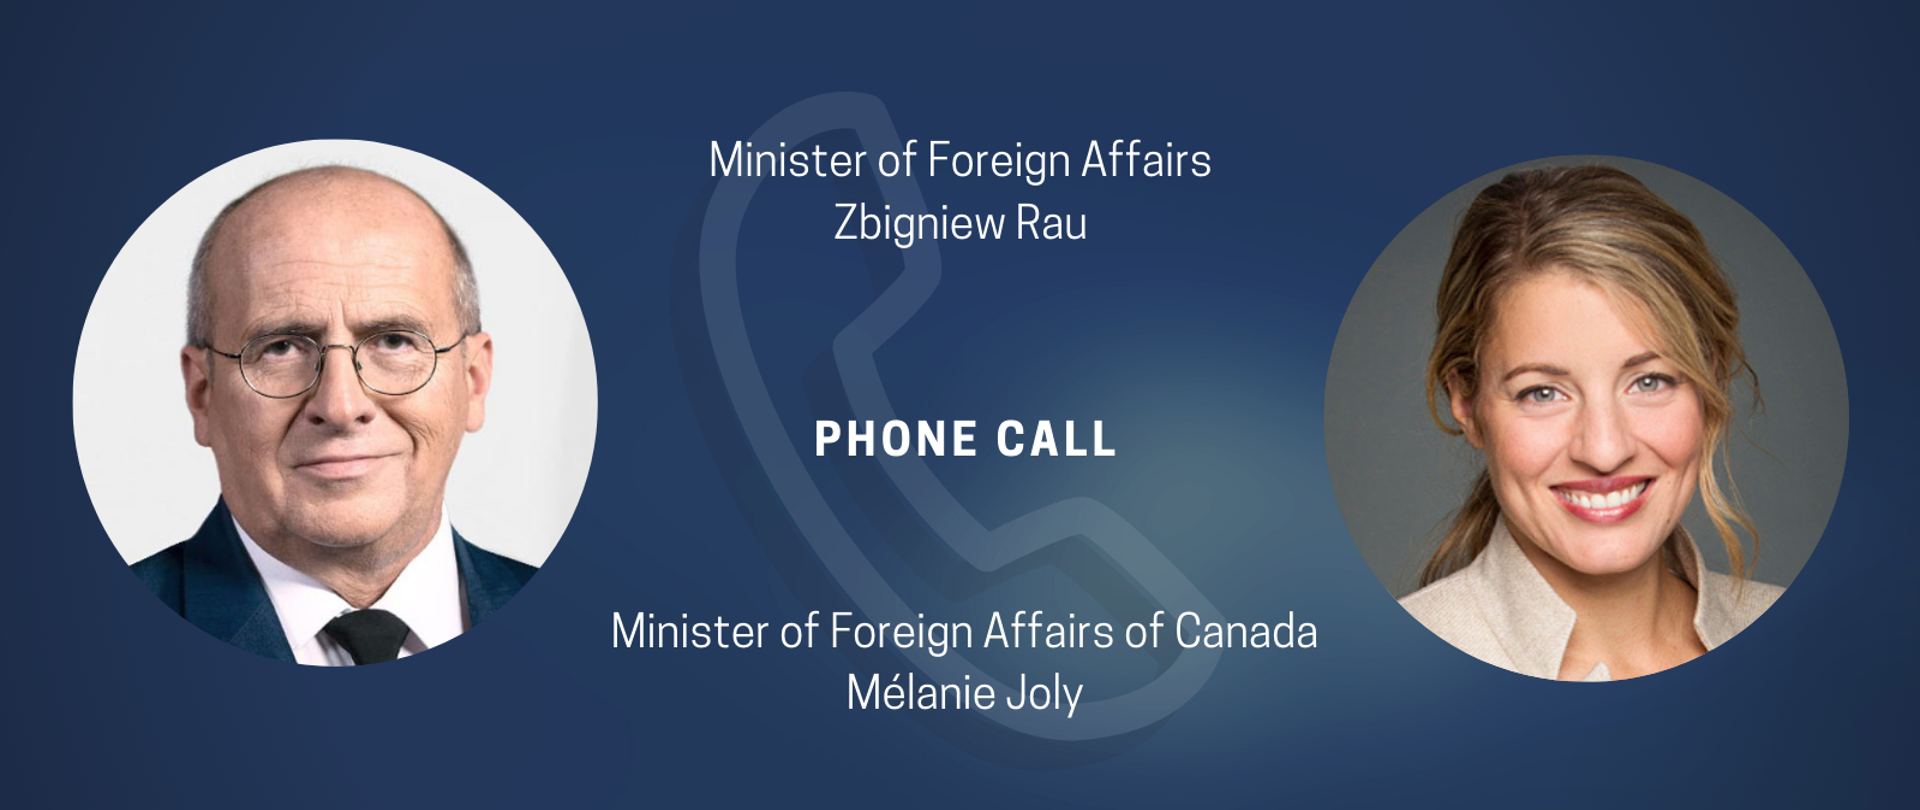 Minister Zbigniew Rau’s call with Canadian Foreign Minister Mélanie Joly